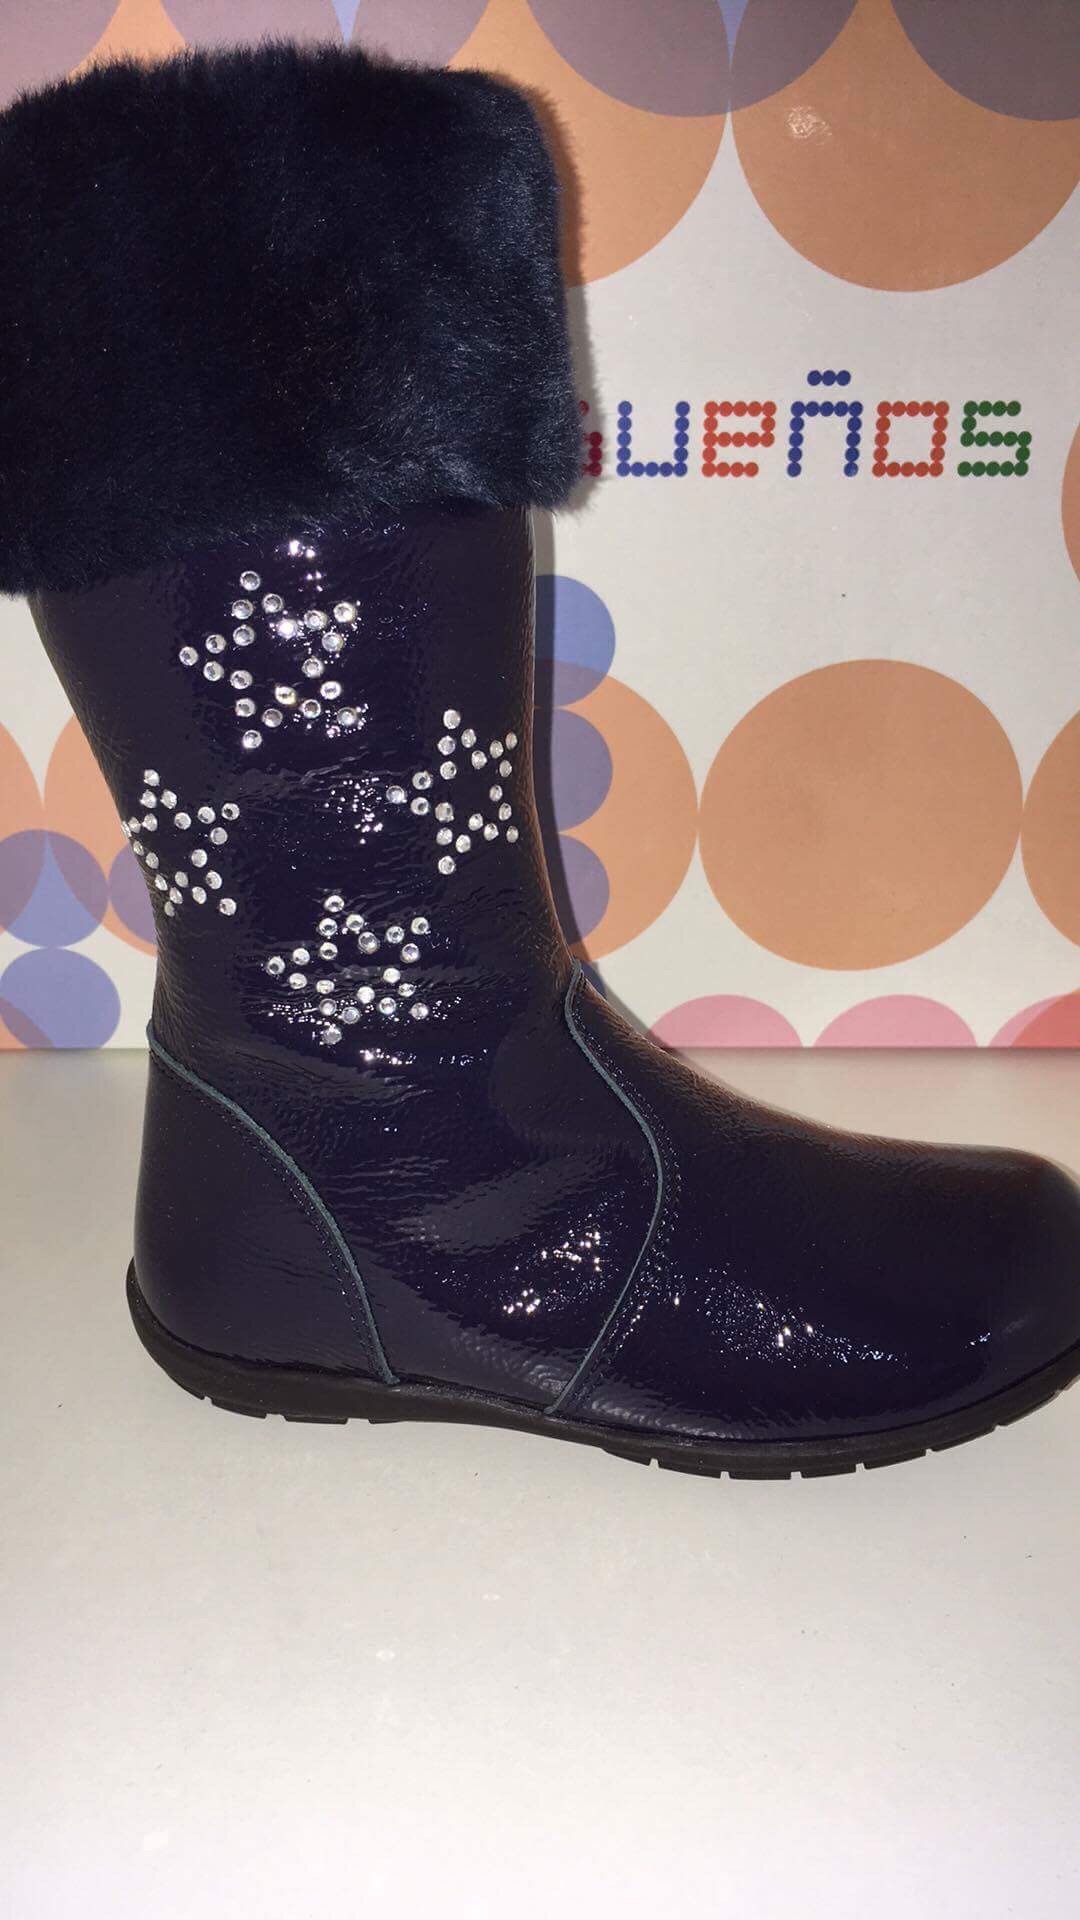 navy boots for girls